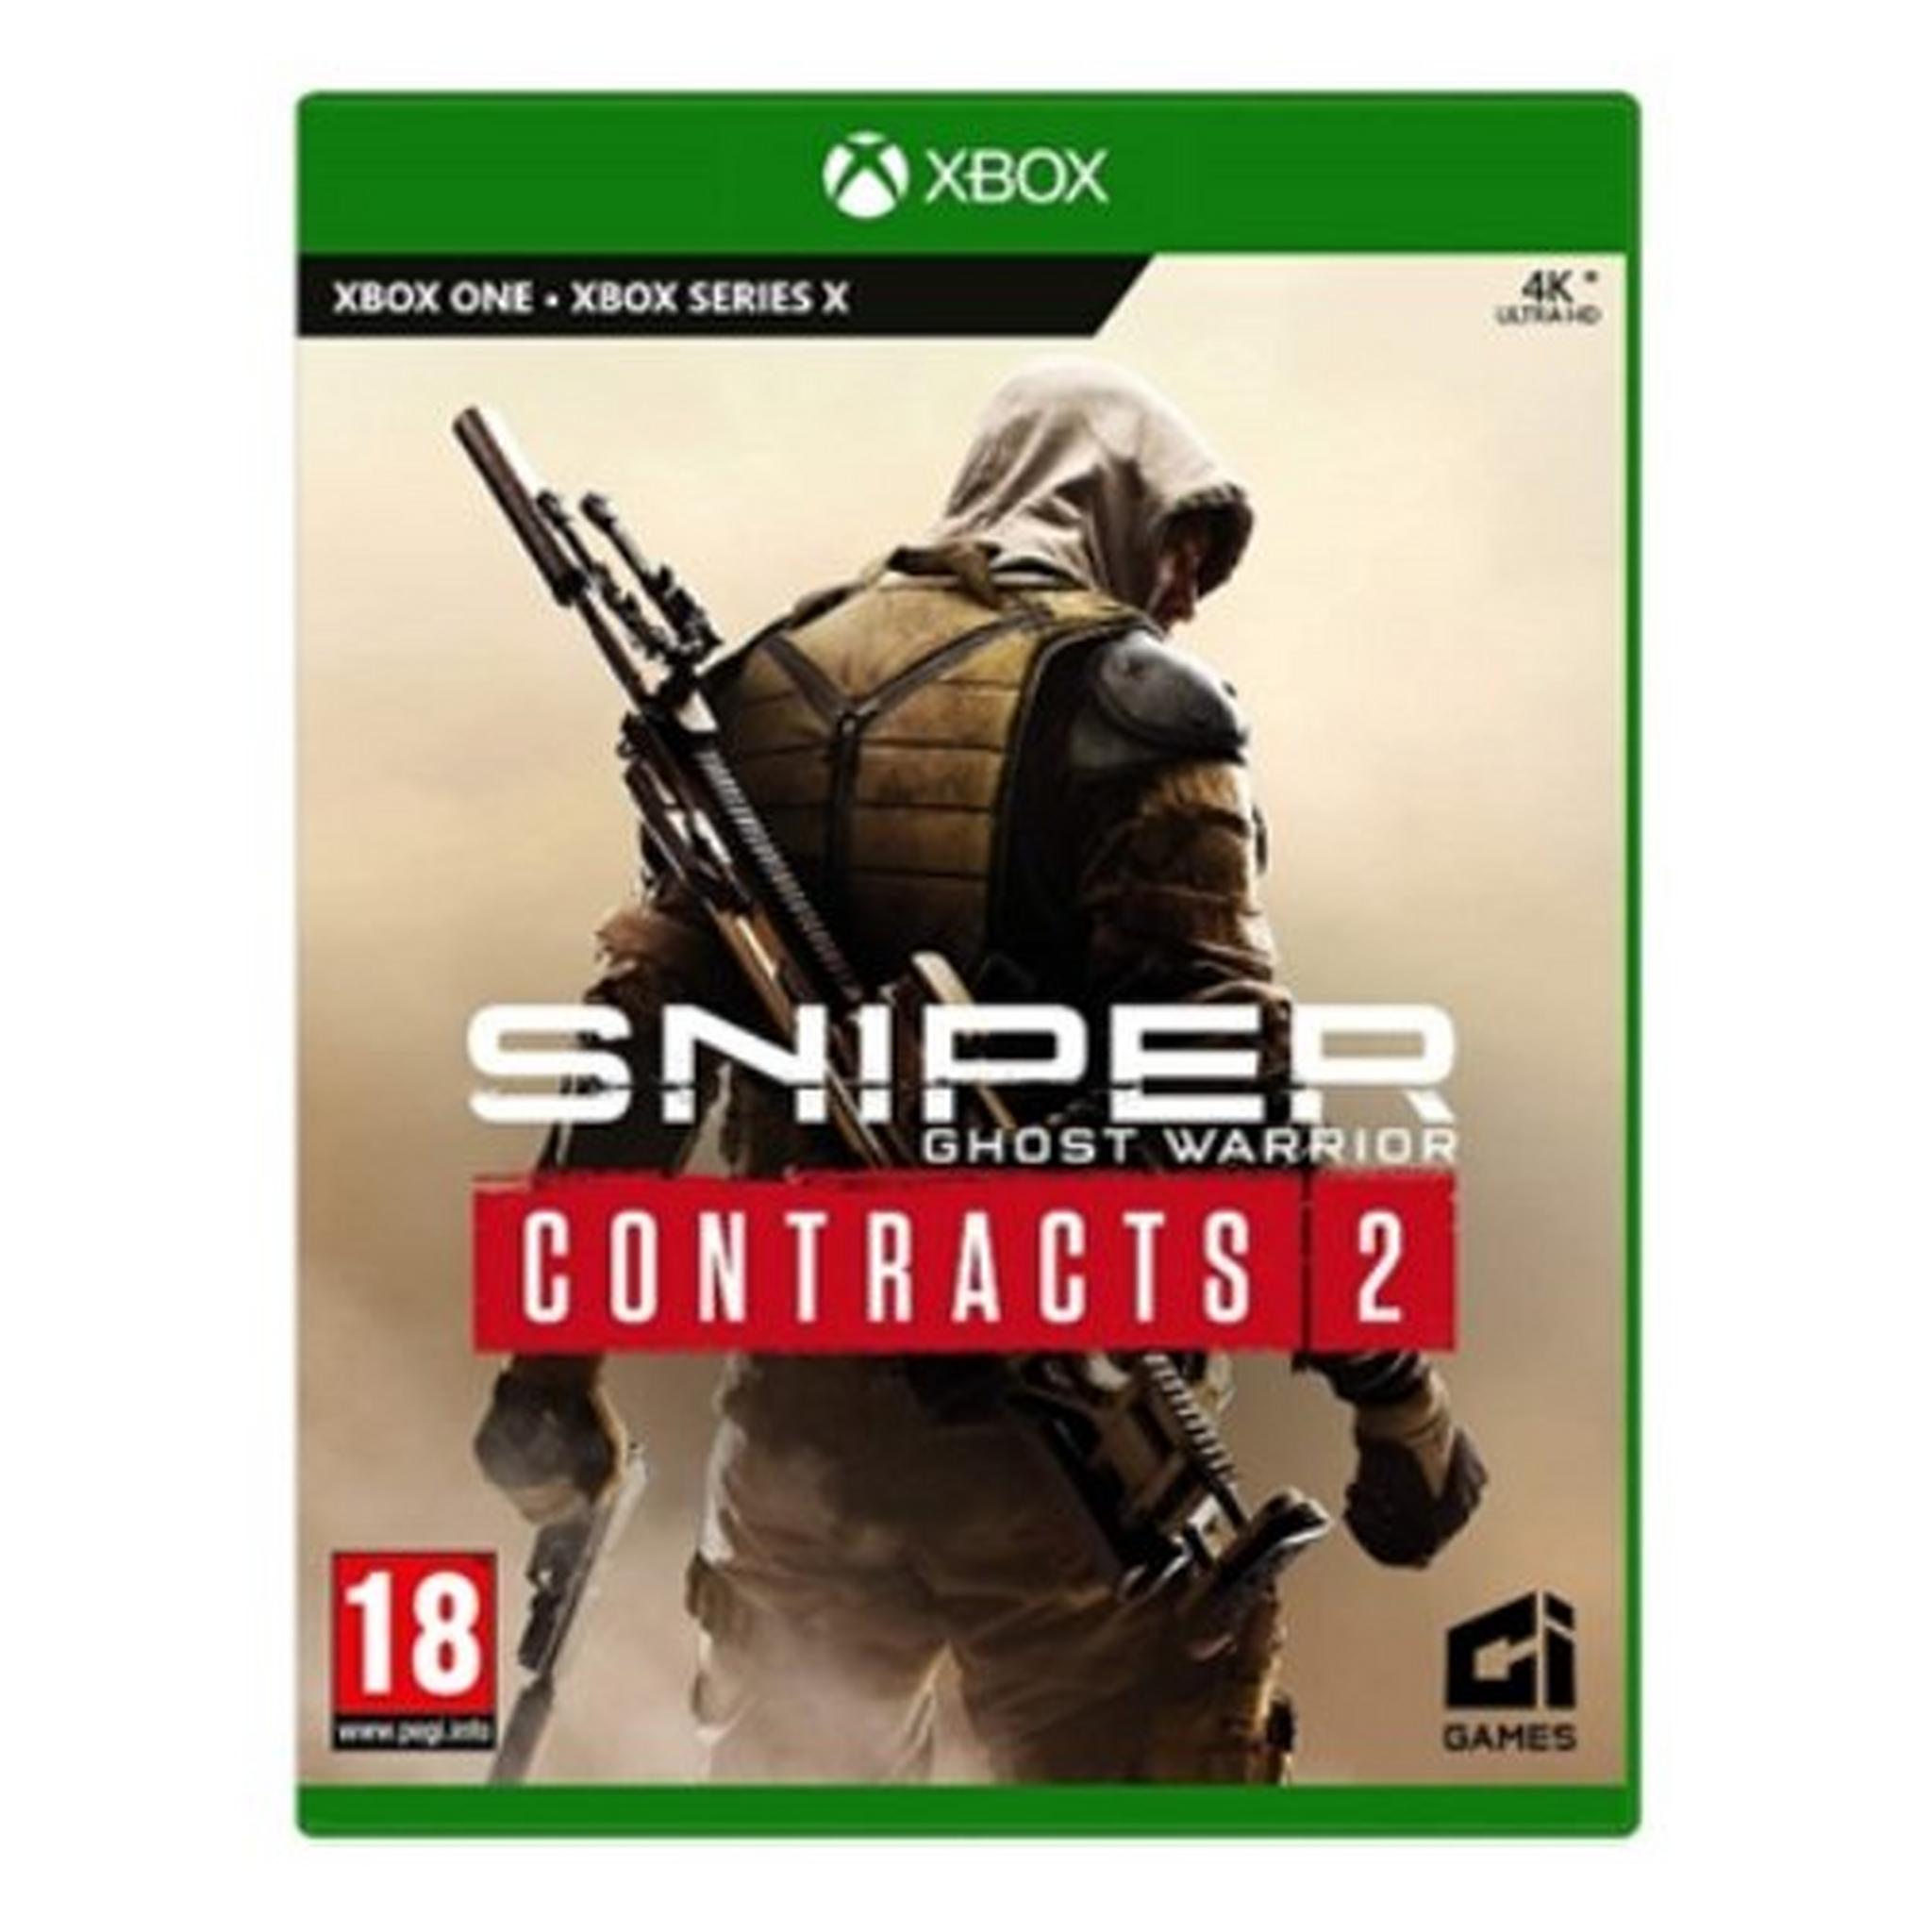 Sniper Ghost Warrior Contracts 2 - Xbox Series X Game